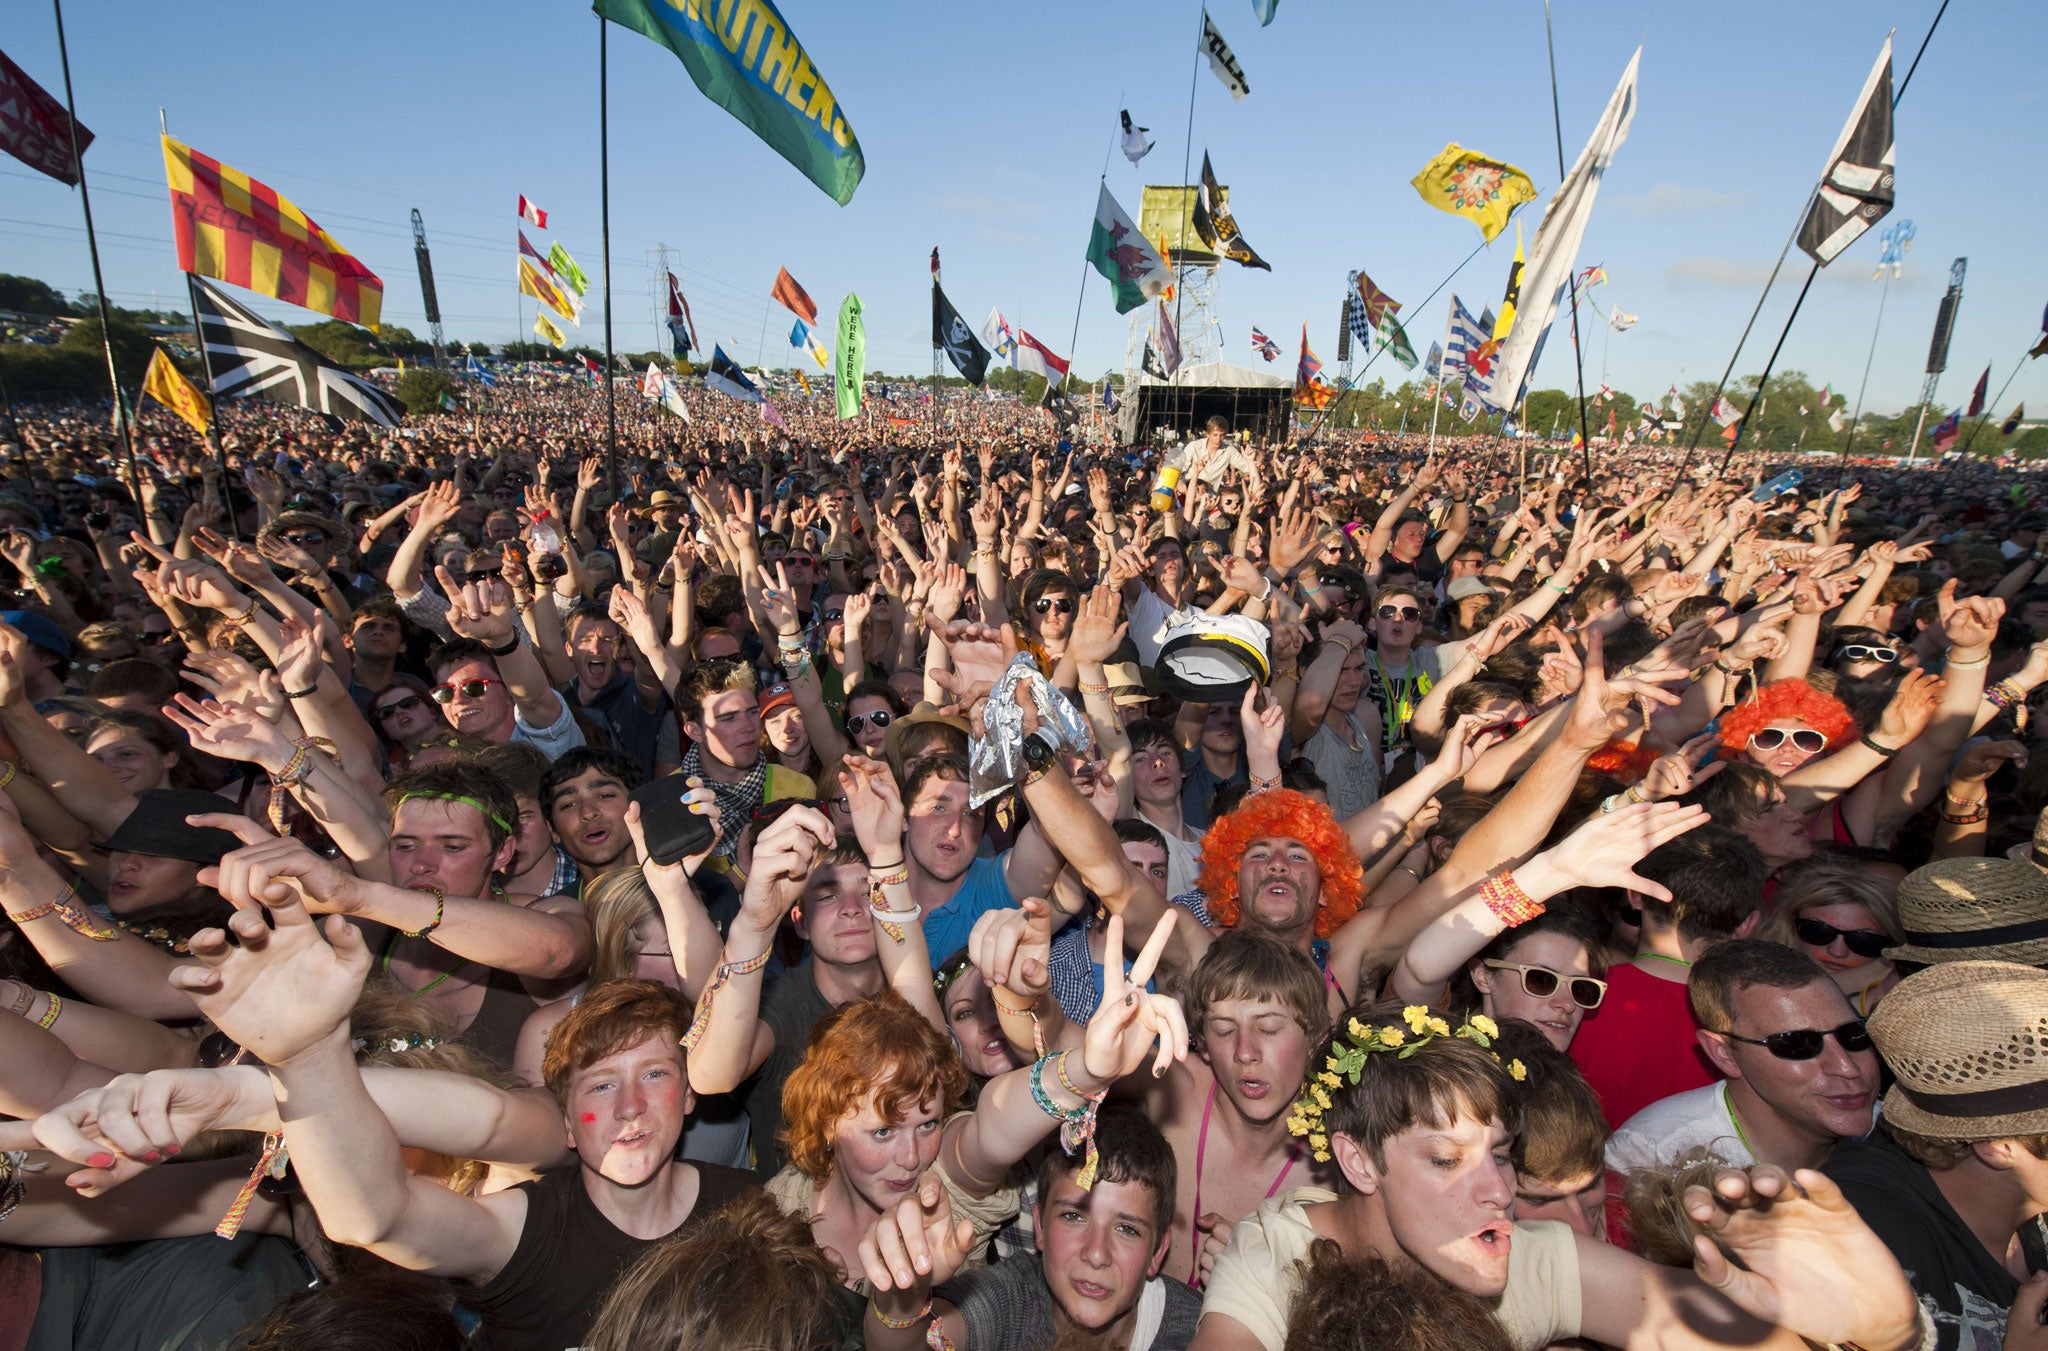 Pilton's peaceful existence is turned upside-down by the arrival of Glastonbury Festival